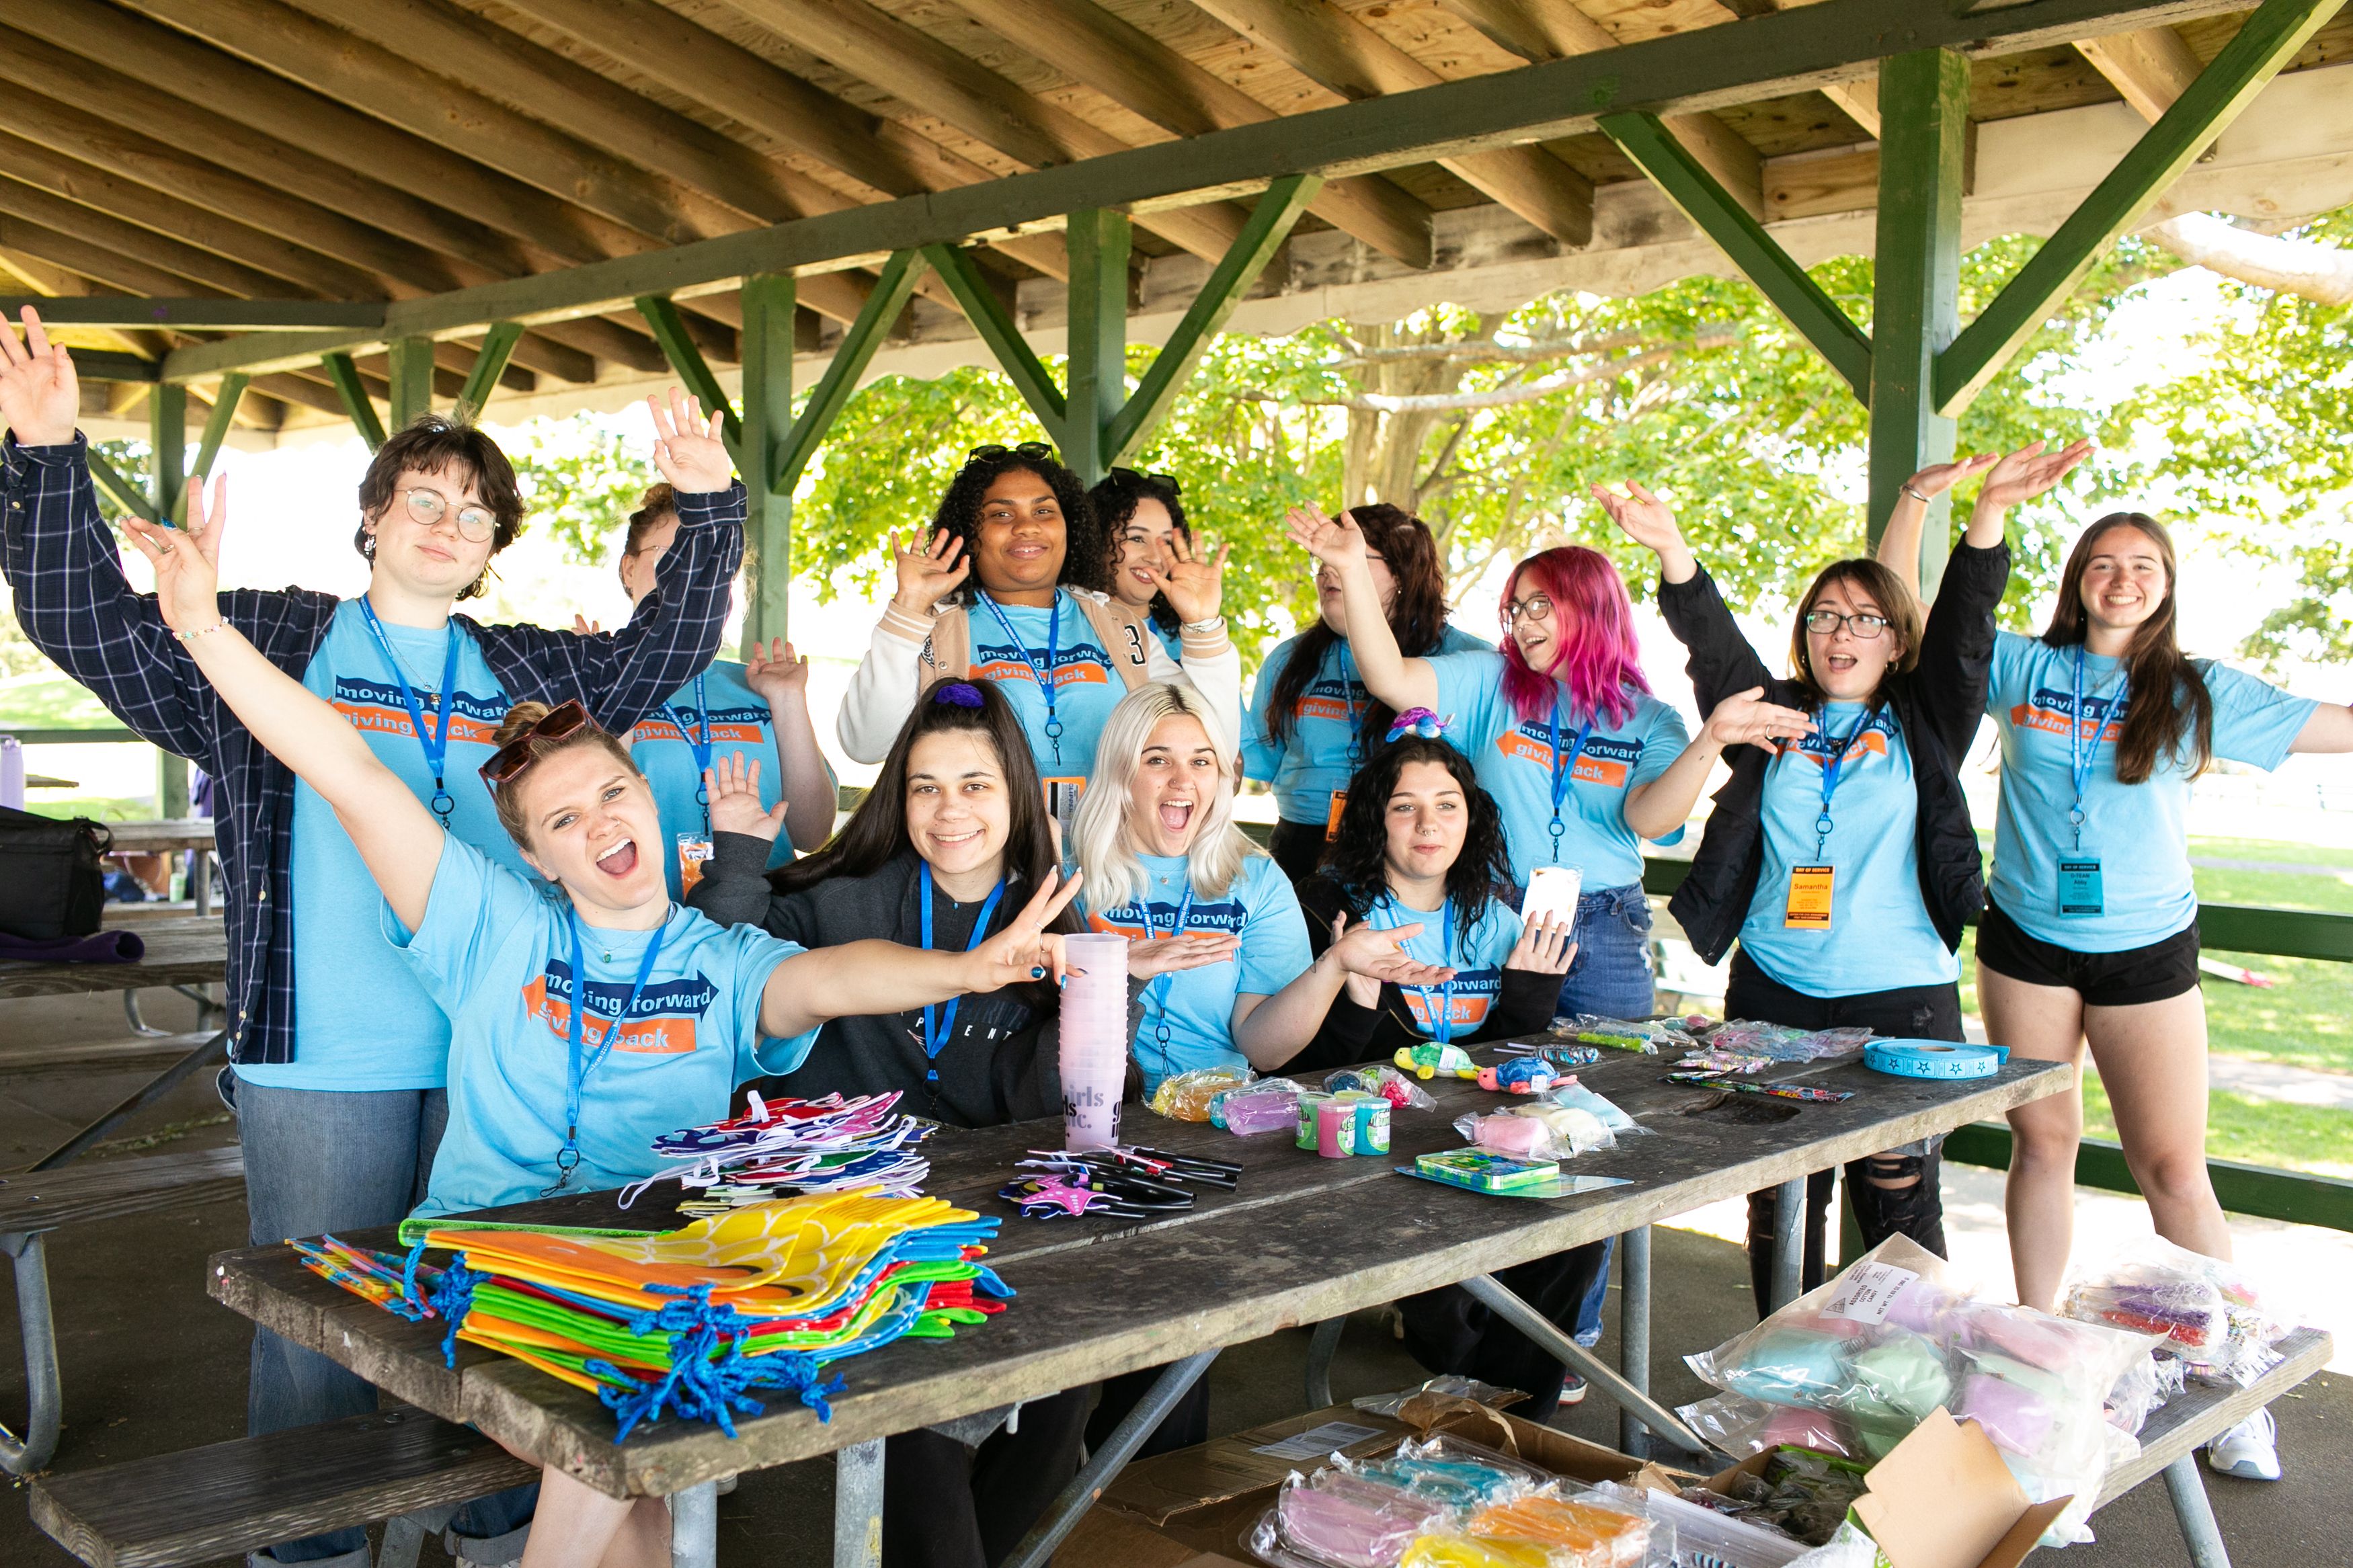 Group of excited students in matching shirts sitting and standing around a picnic table